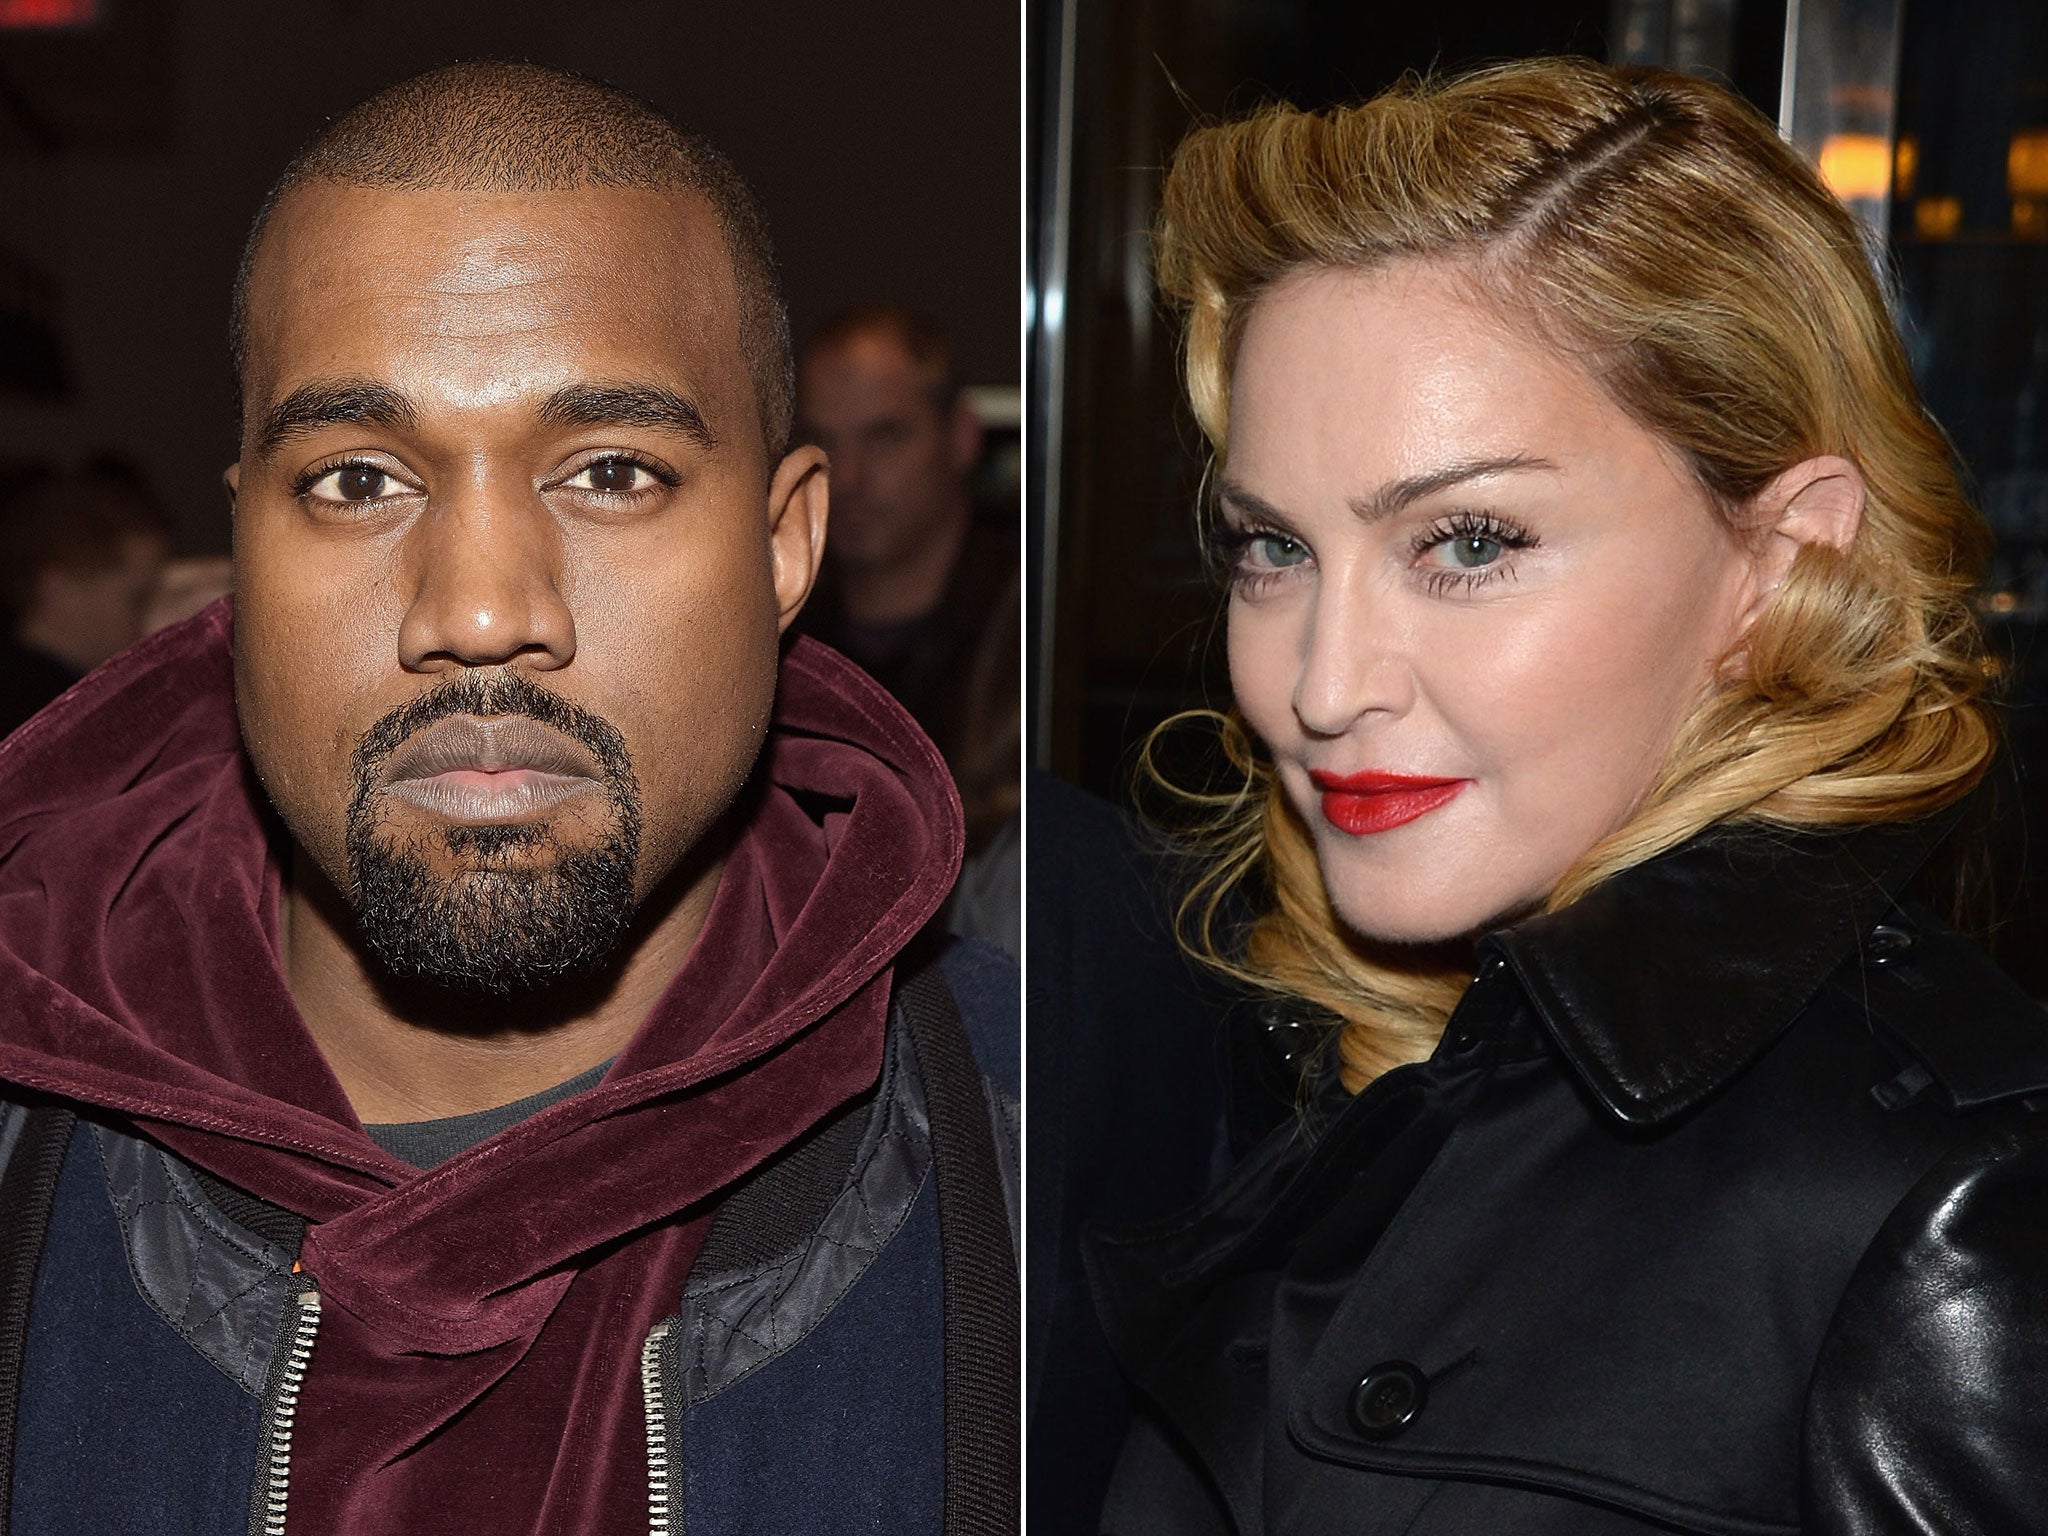 Kanye West and Madonna are 'comrades' in breaking musical boundaries, apparently